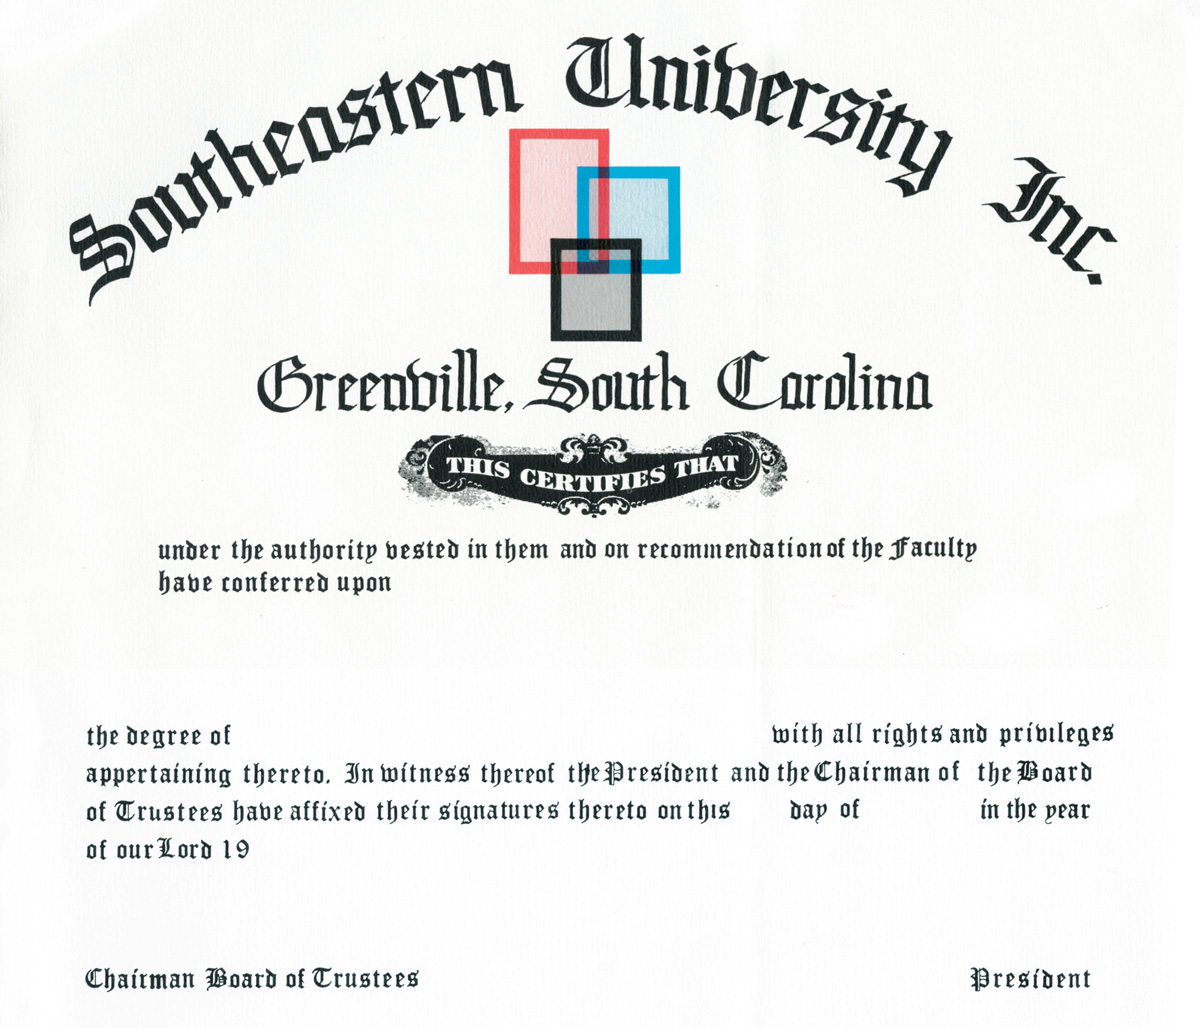 A fake diploma from Southeastern University INC.